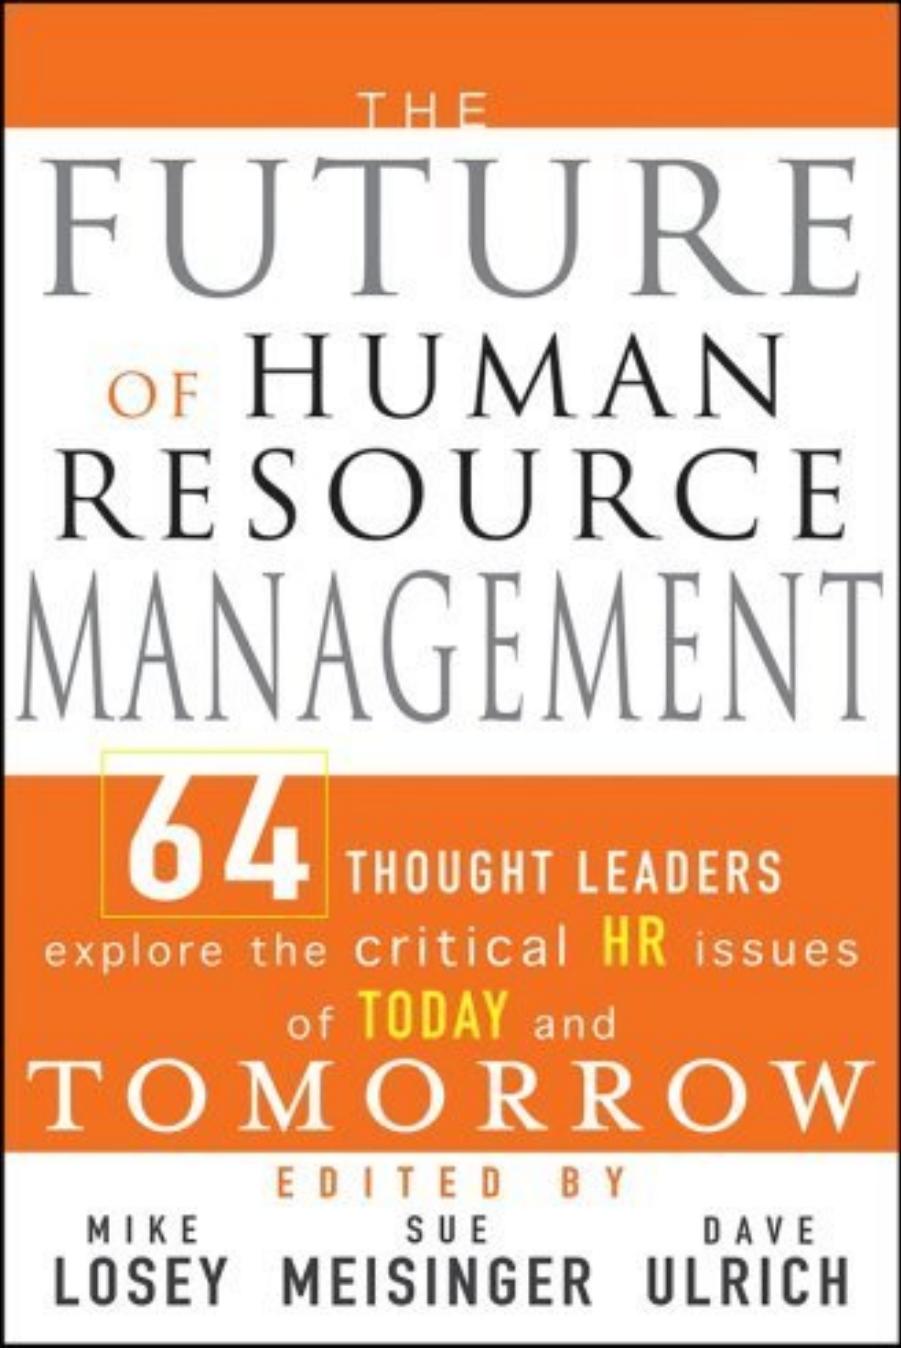 Mike Losey, Dave Ulrich, Sue Meisinger The Future of Human Resource Management 64 Thought Leaders Explore the Critical HR Issues of Today and Tomorrow 2005